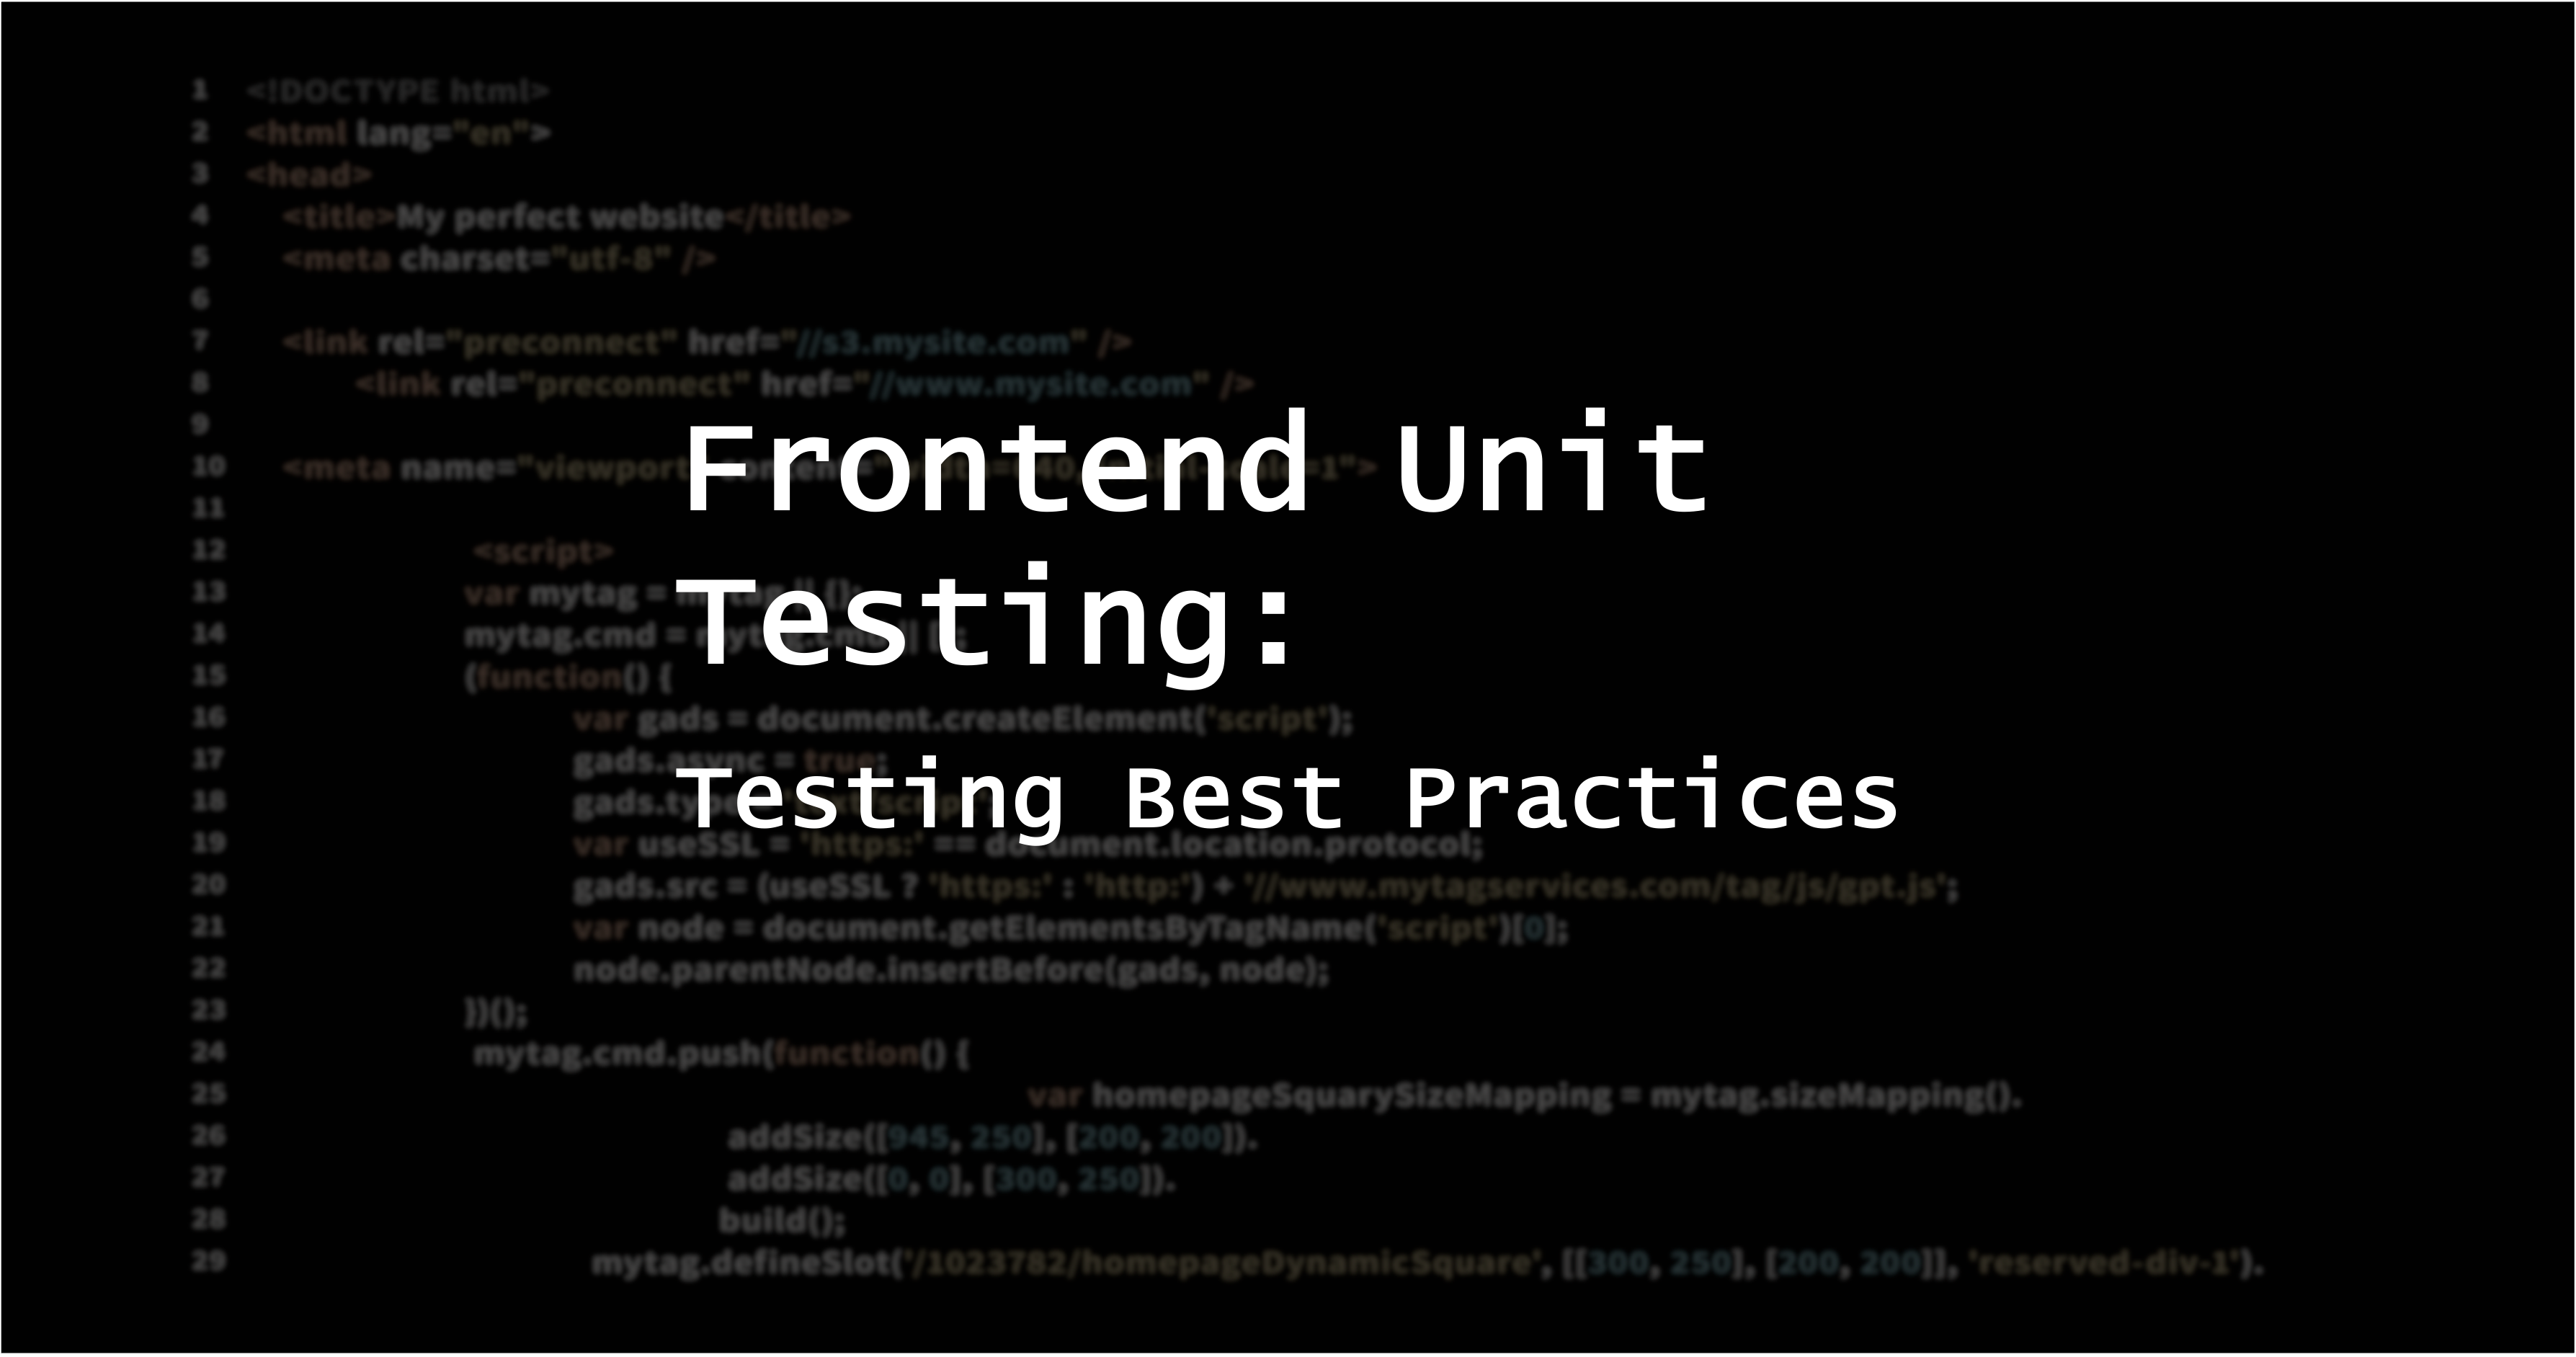 Text on a black background saying "frontend unit testing best practices"